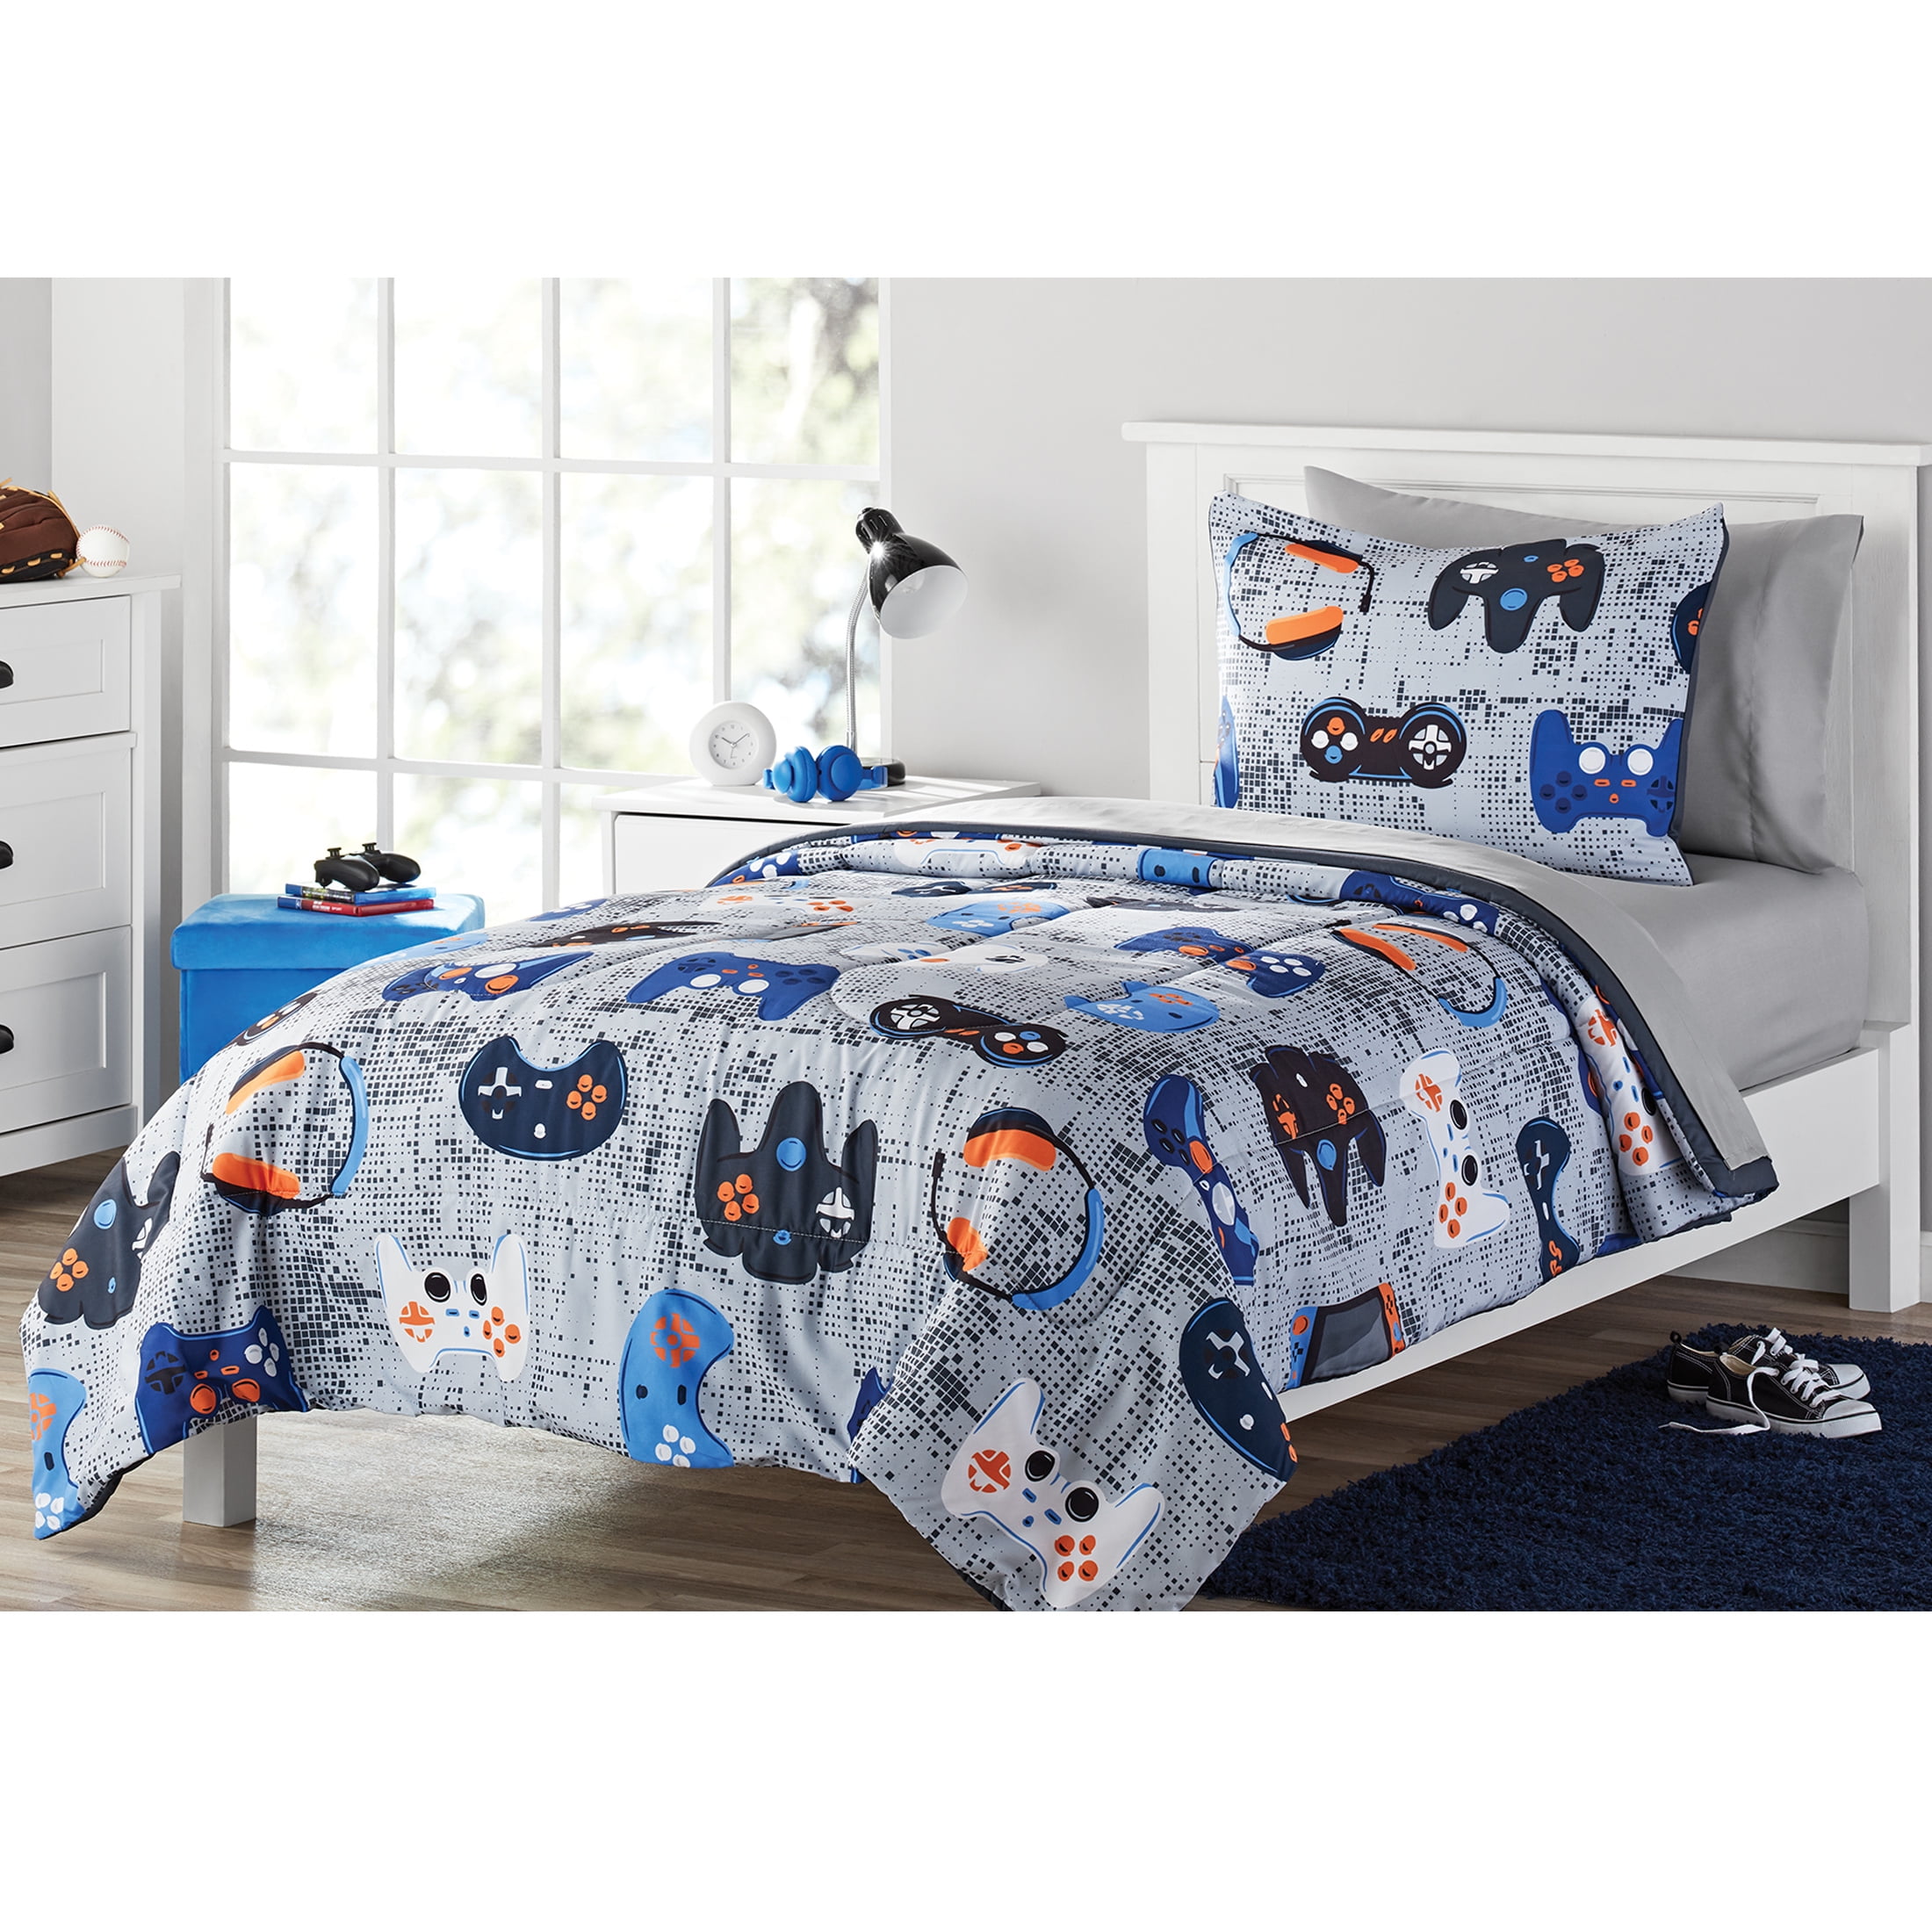 Bedsure Dorm Bedding Ivory Twin Comforter Set Kids - 5 Pieces Pintuck Bed  in A Bag with Comforters, Sheets, Pillowcases & Shams